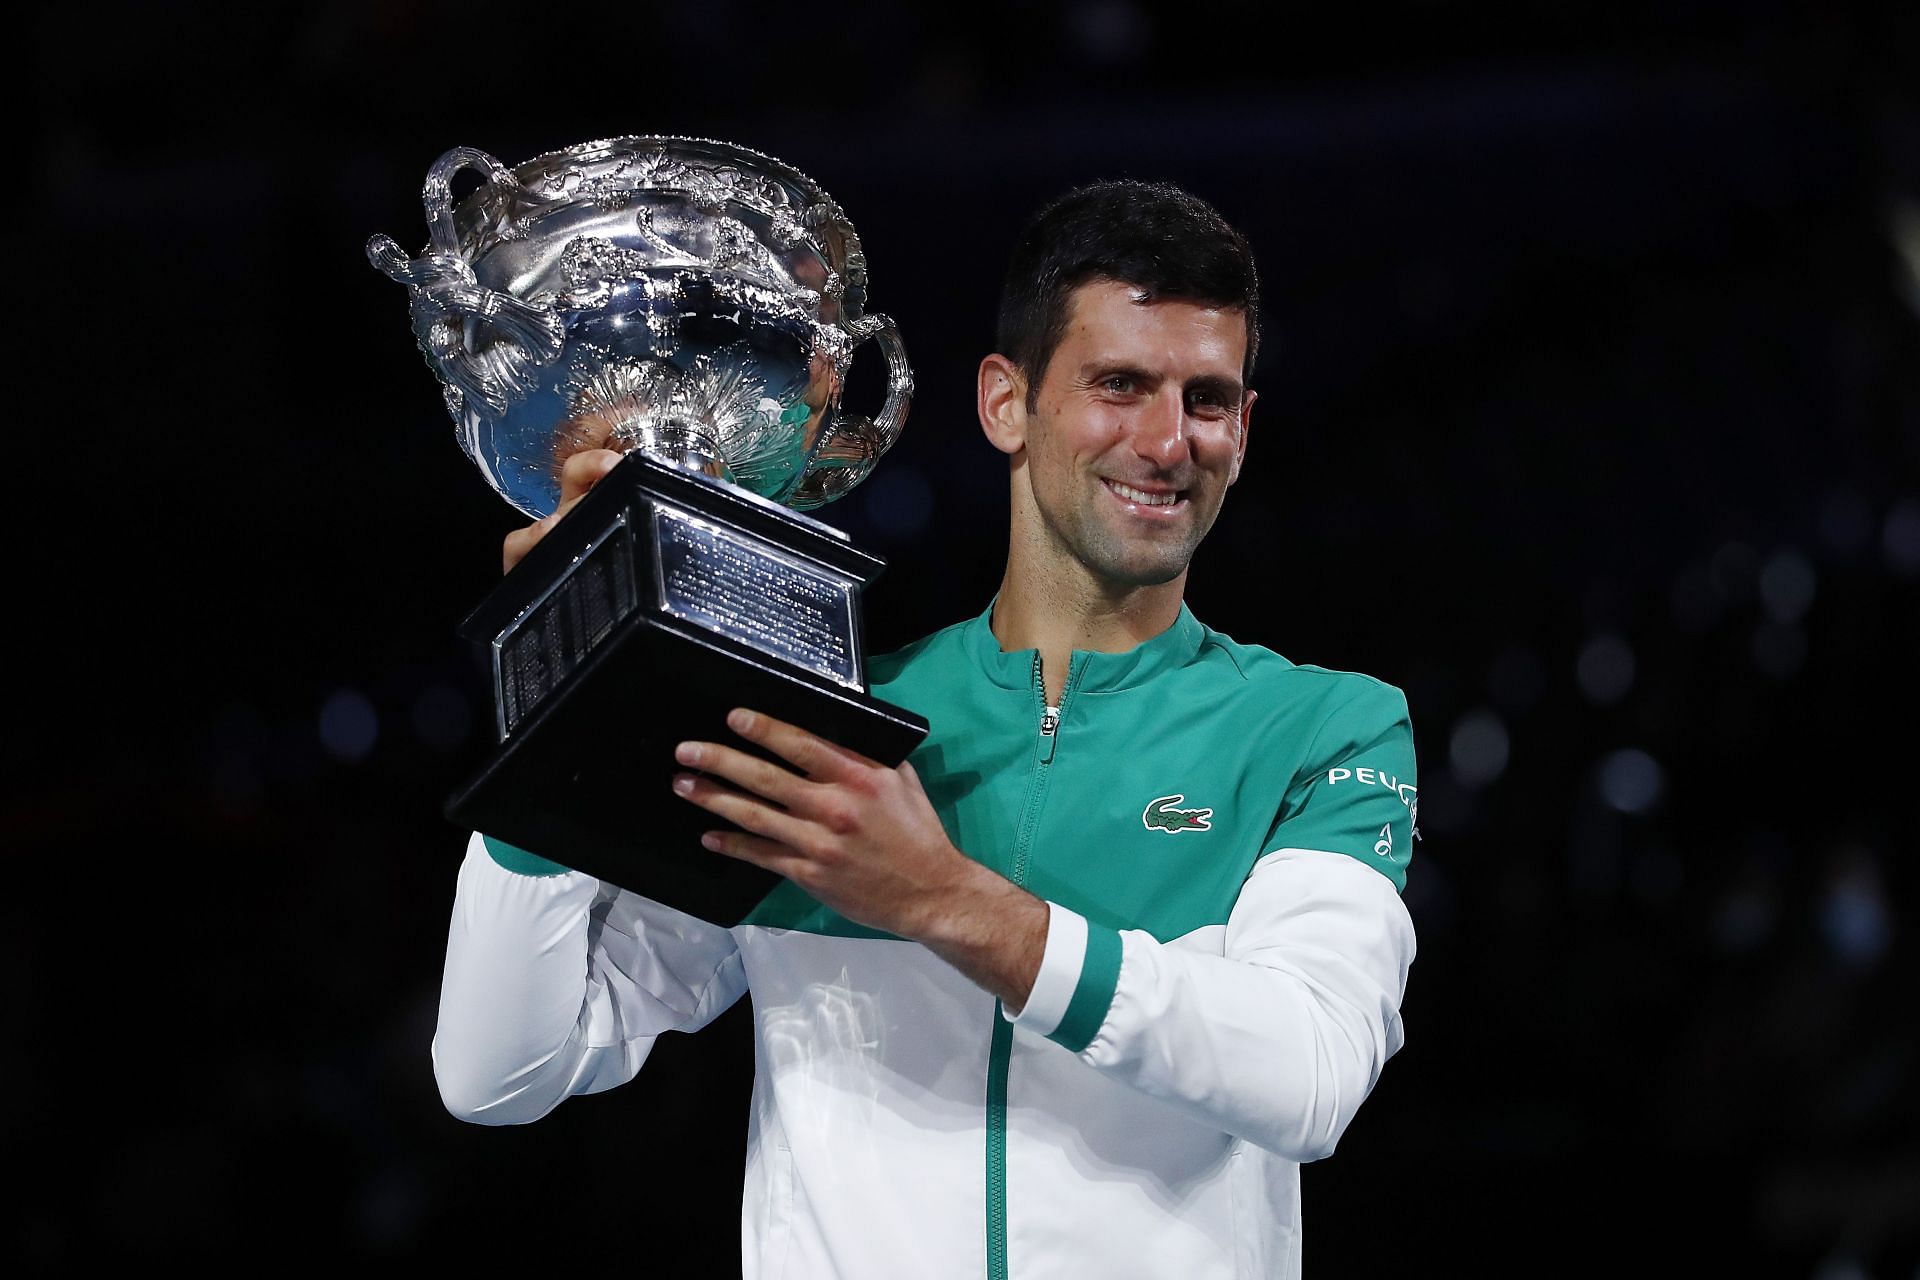 Djokovic has won the title more times than any other player